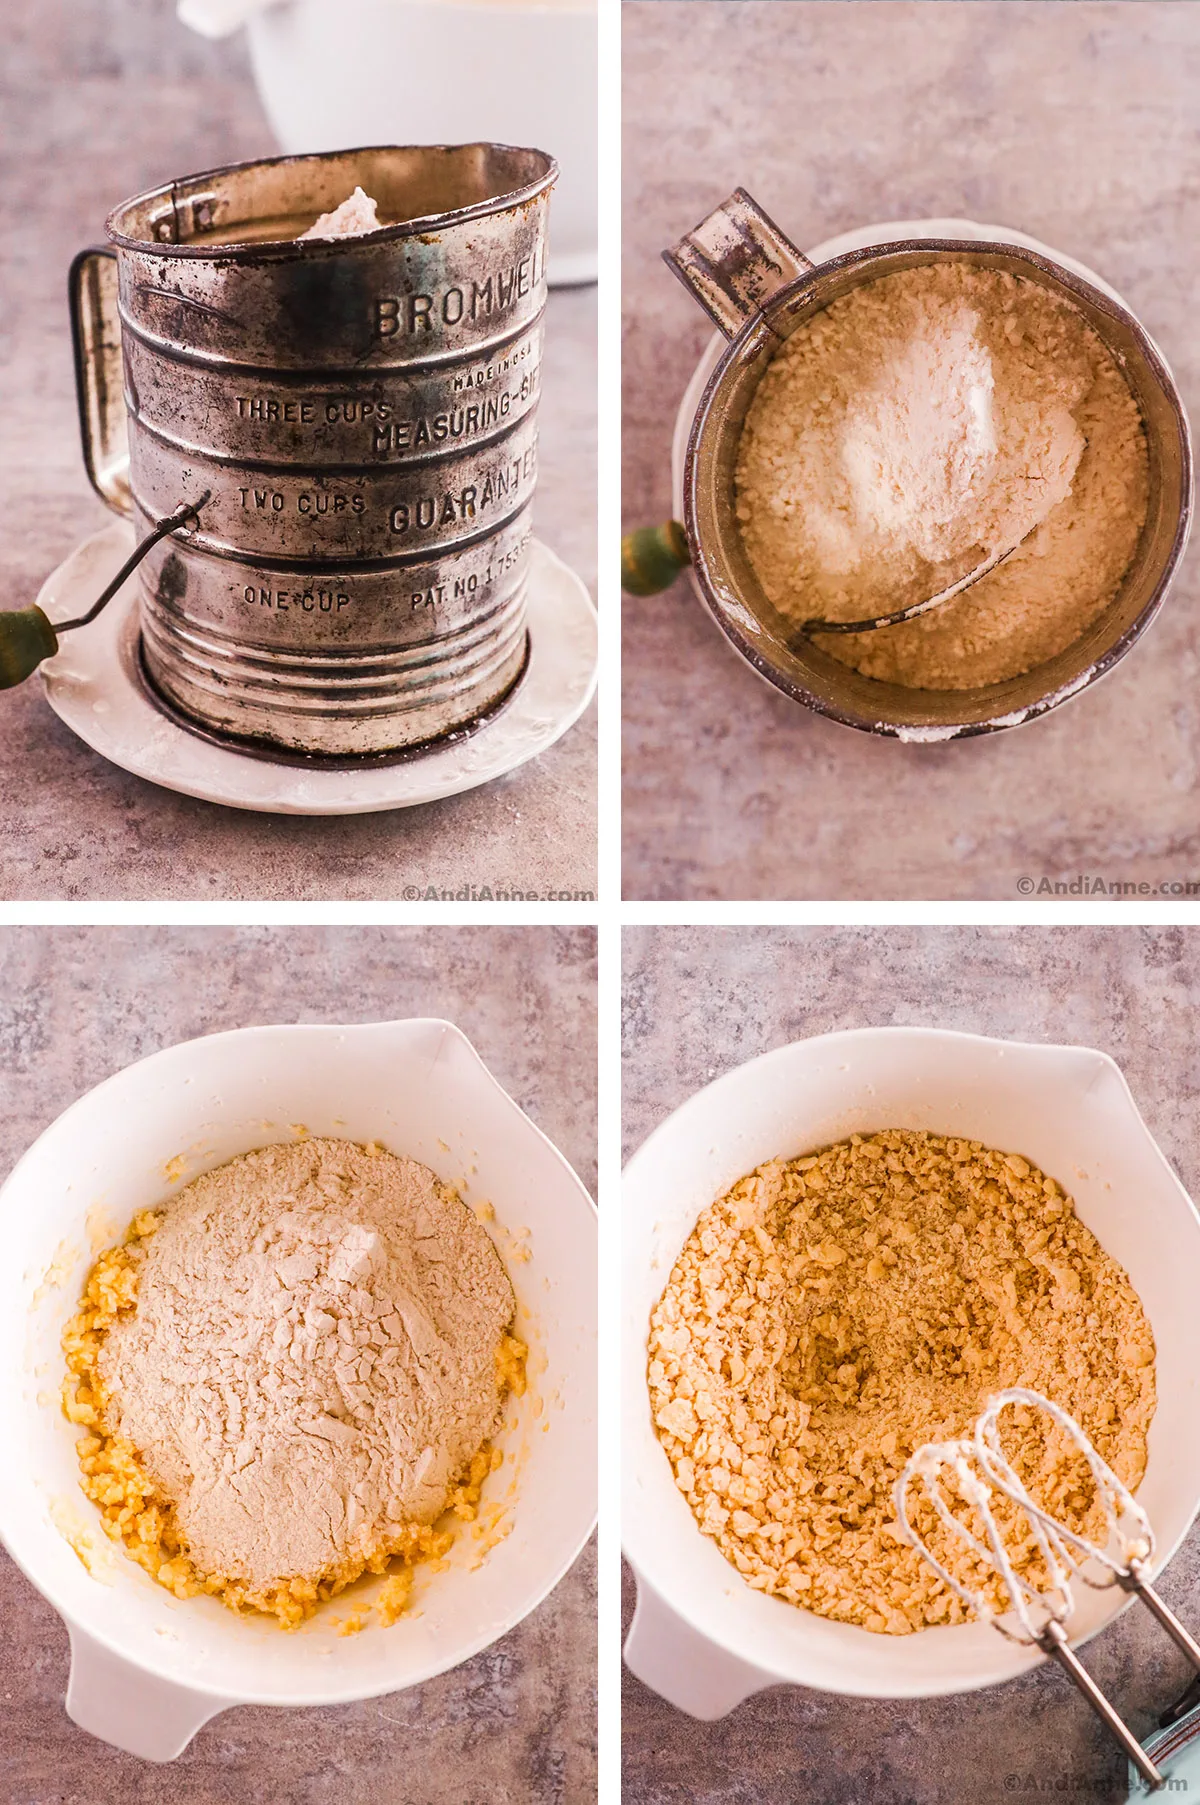 Four images combined, first two are a sifter with flour inside. Second two are bowl of cookie mixture with flour first unmixed, then mixed together to form a crumbly mixture.